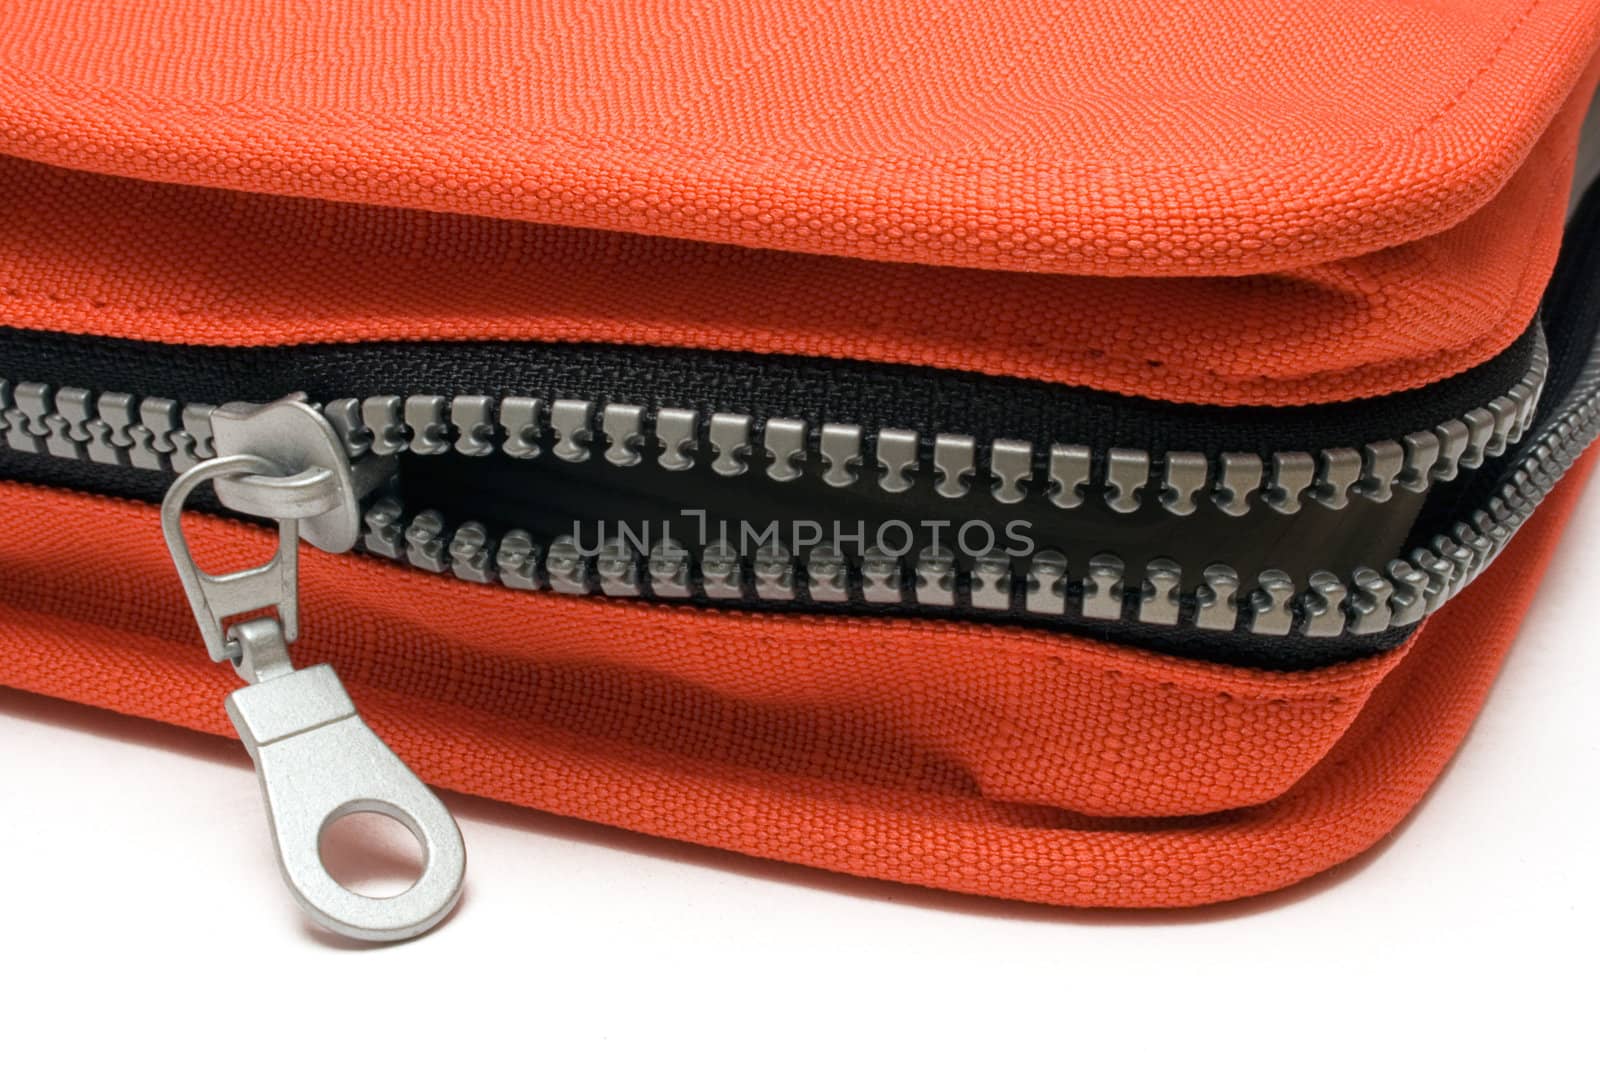 Opening the zipper of a red bag. Isolated on a white background.